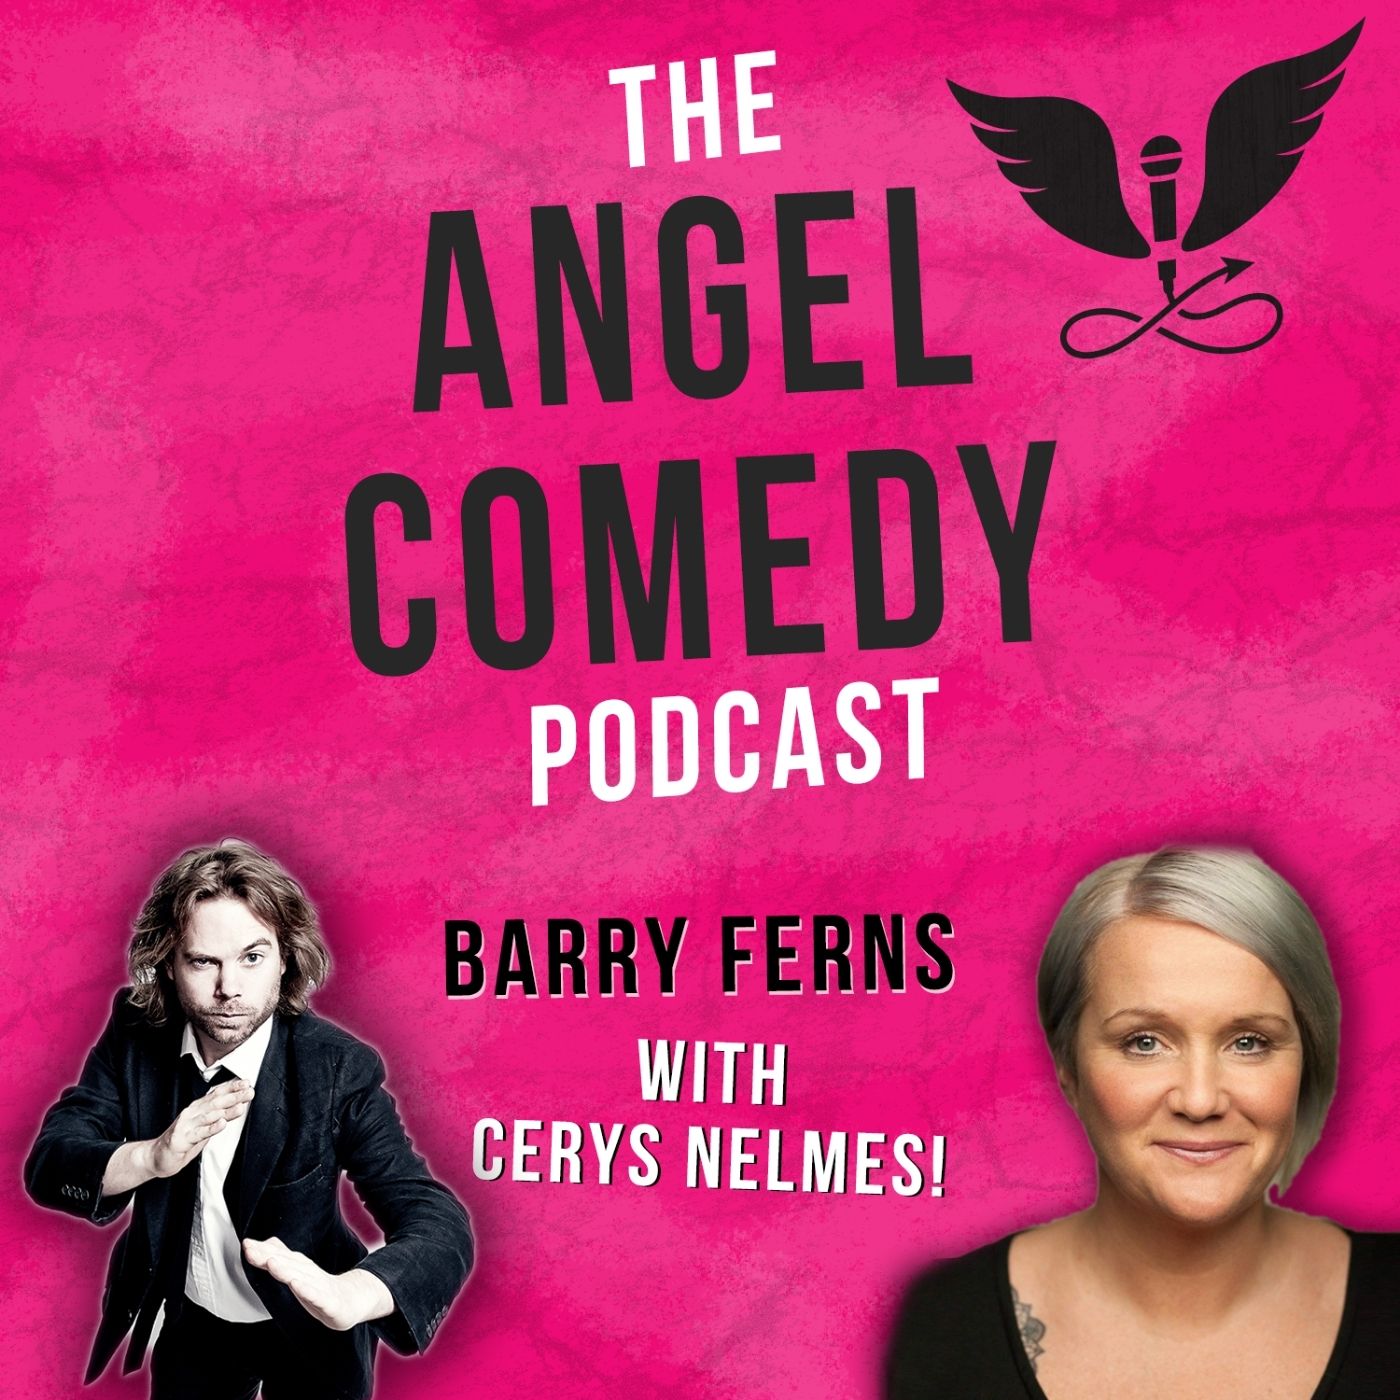 The Angel Comedy Podcast with Cerys Nelmes